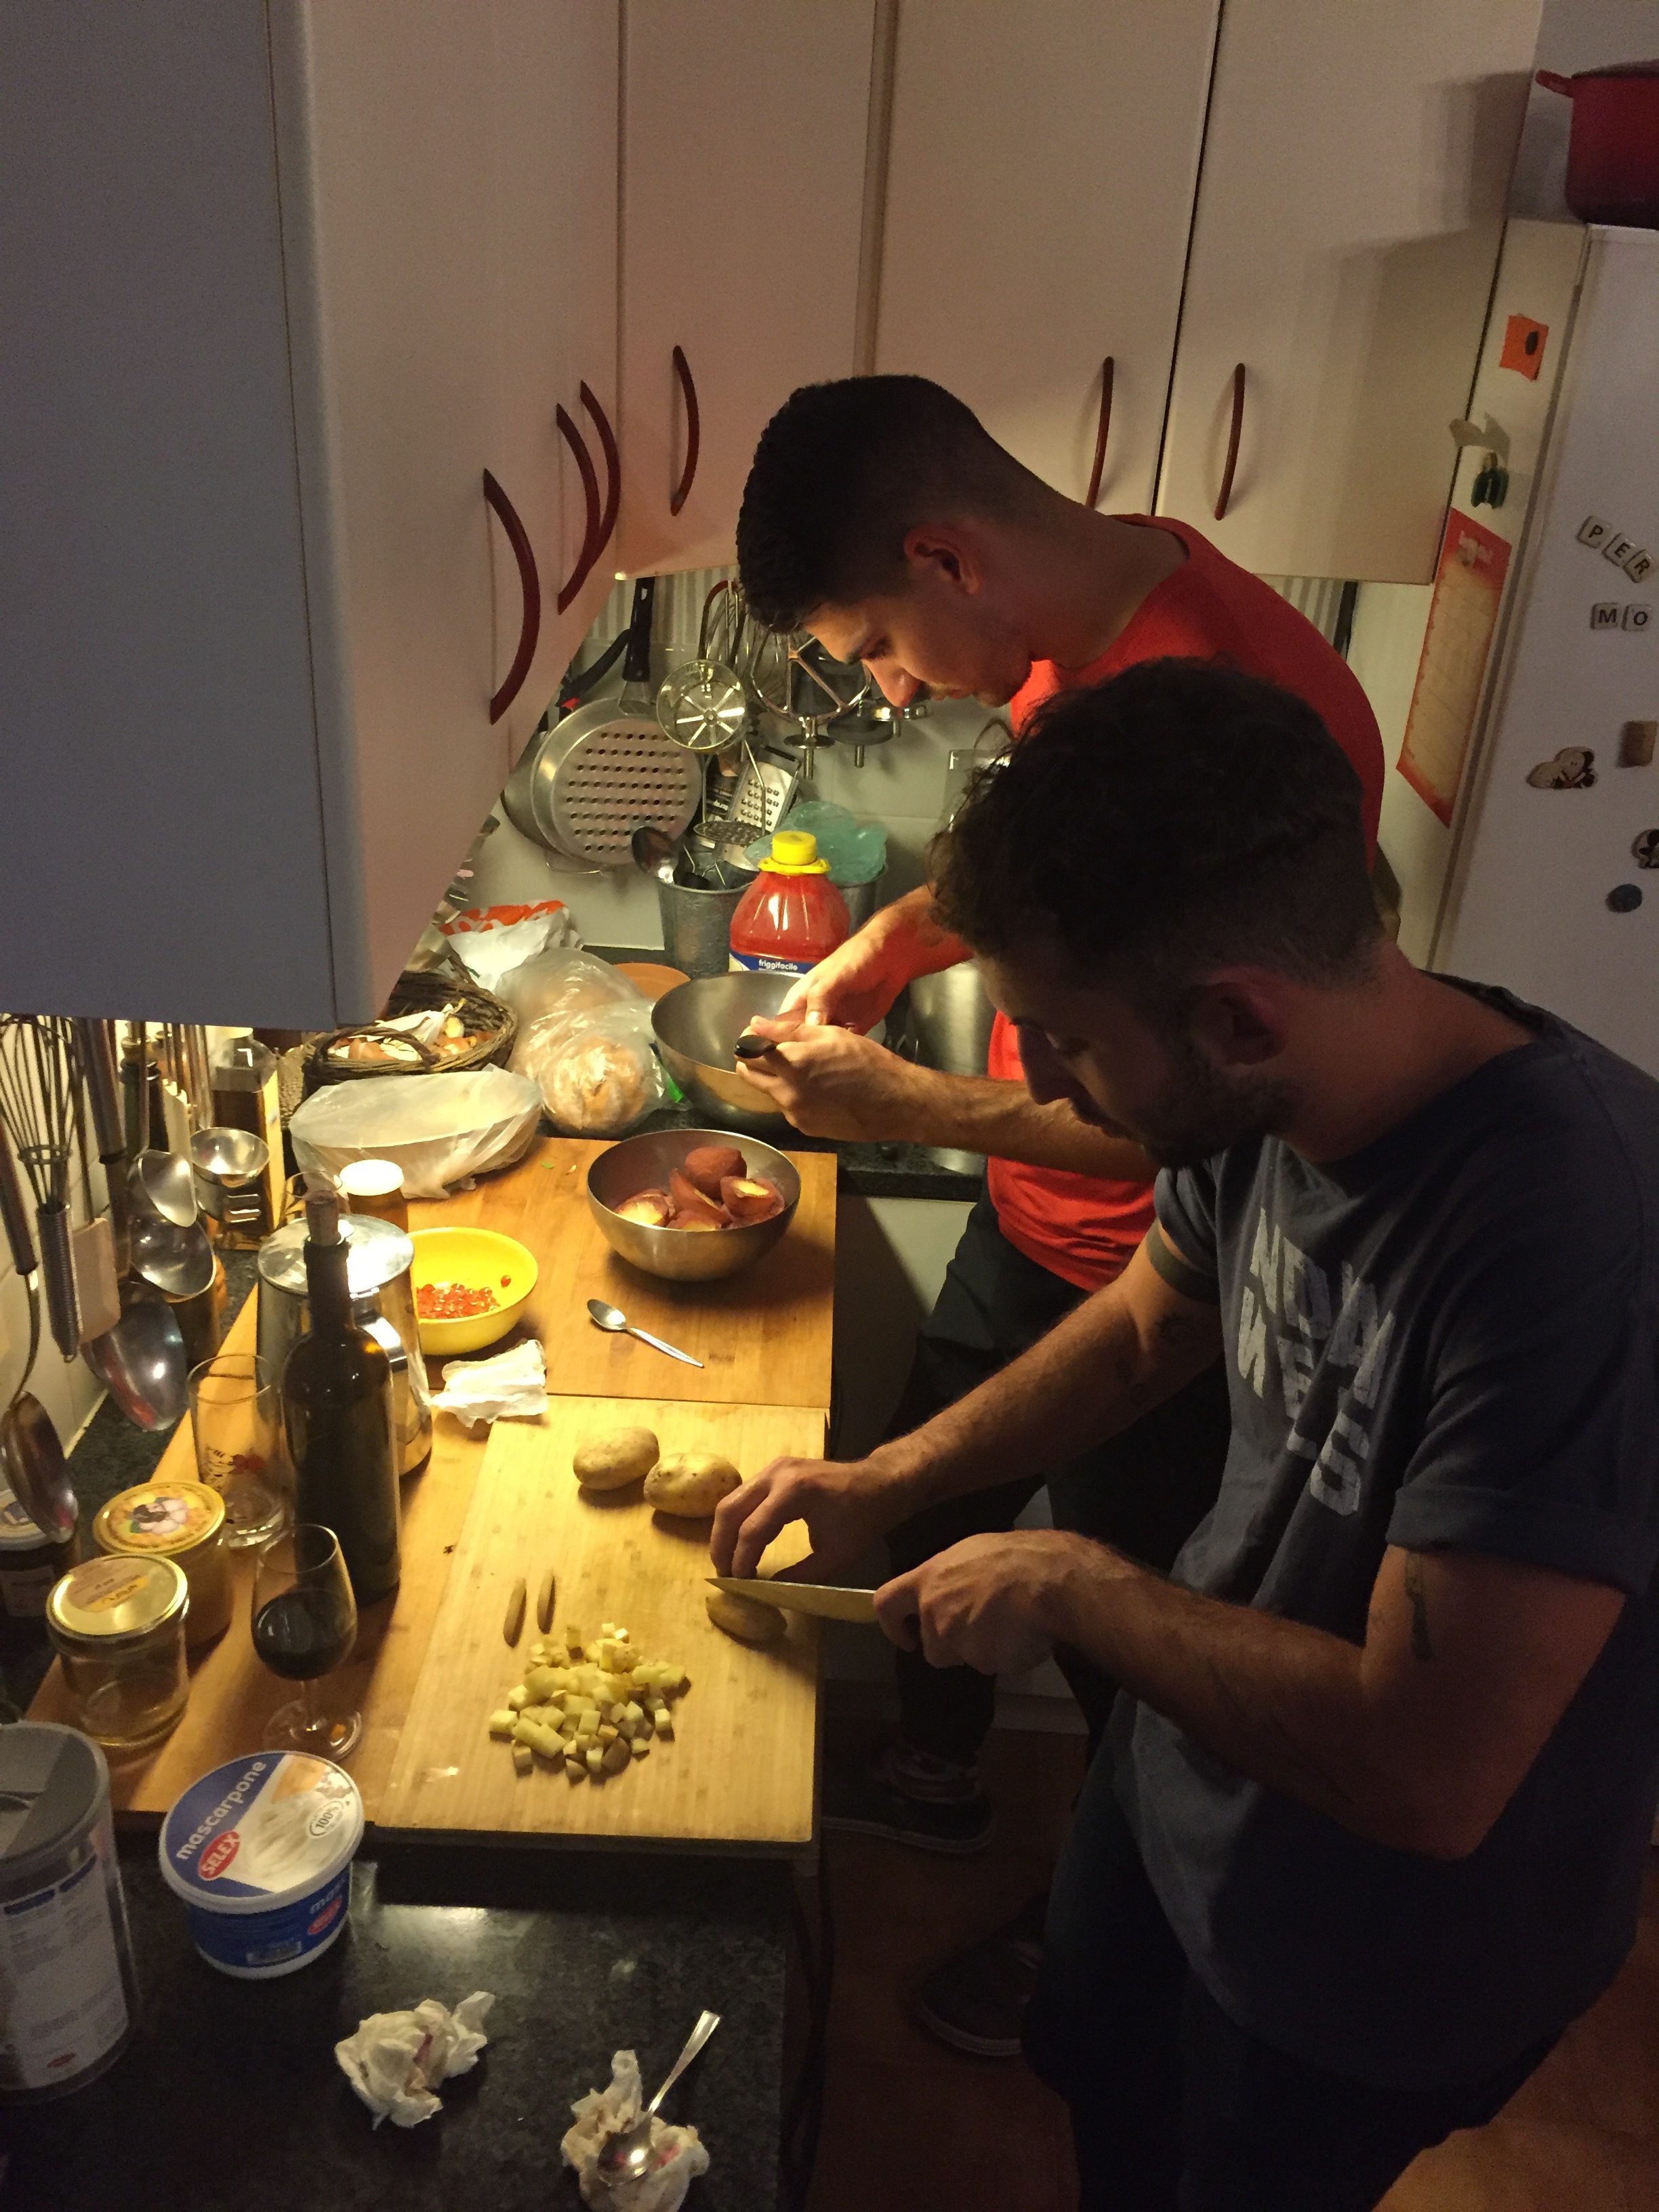 The chefs at work